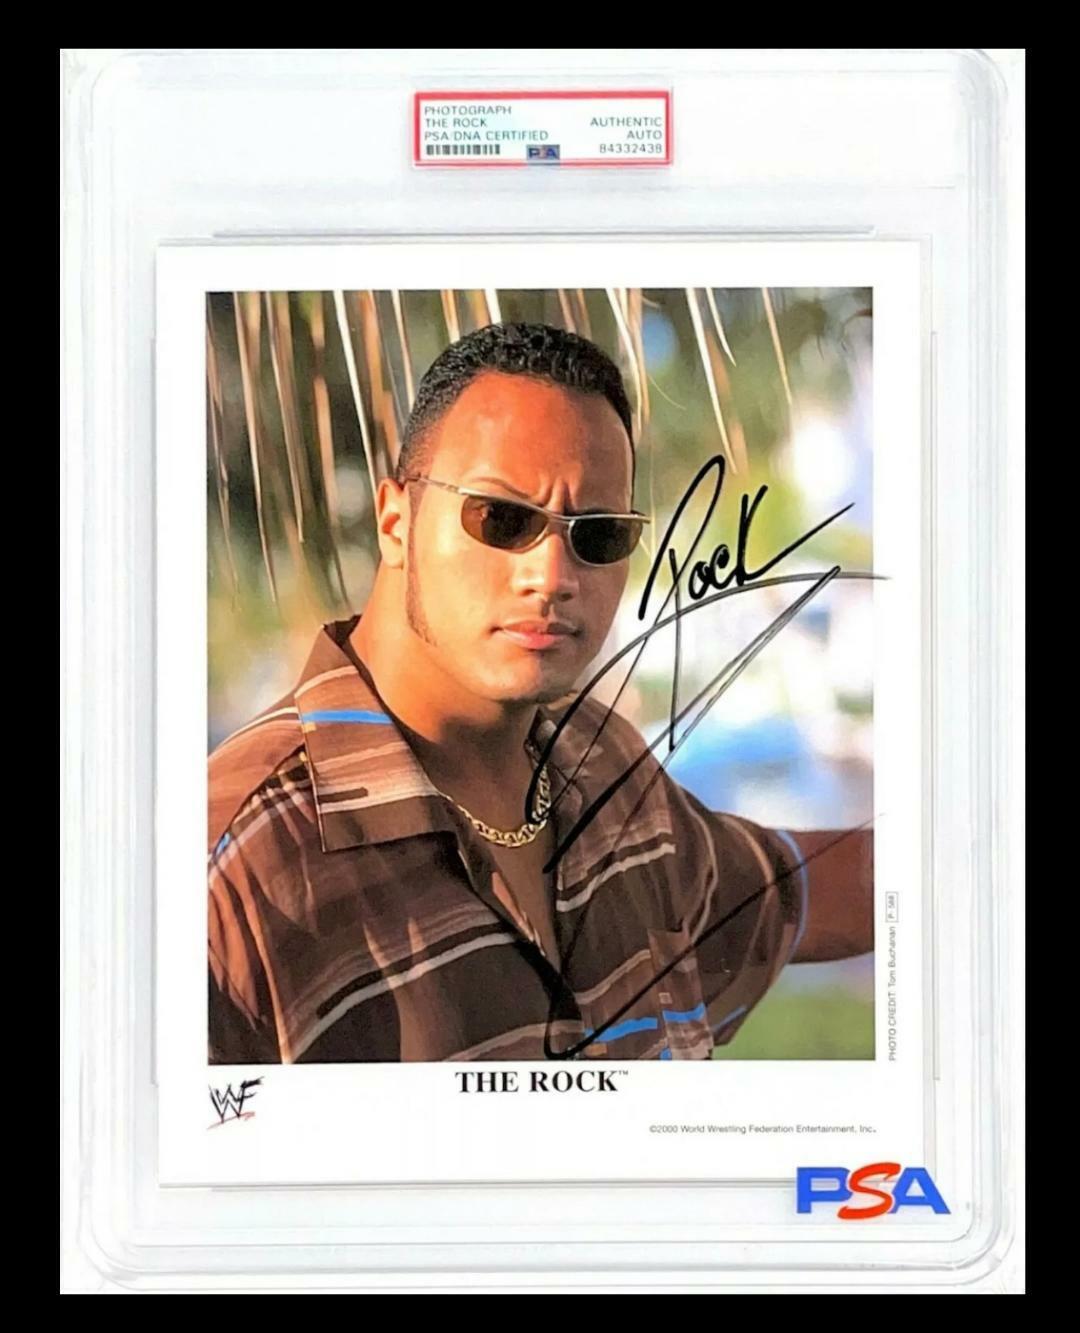 WWE THE ROCK P-588 HAND SIGNED 8X10 ORIGINAL PROMO Photo Poster painting ENCAPSULATED BY PSA COA